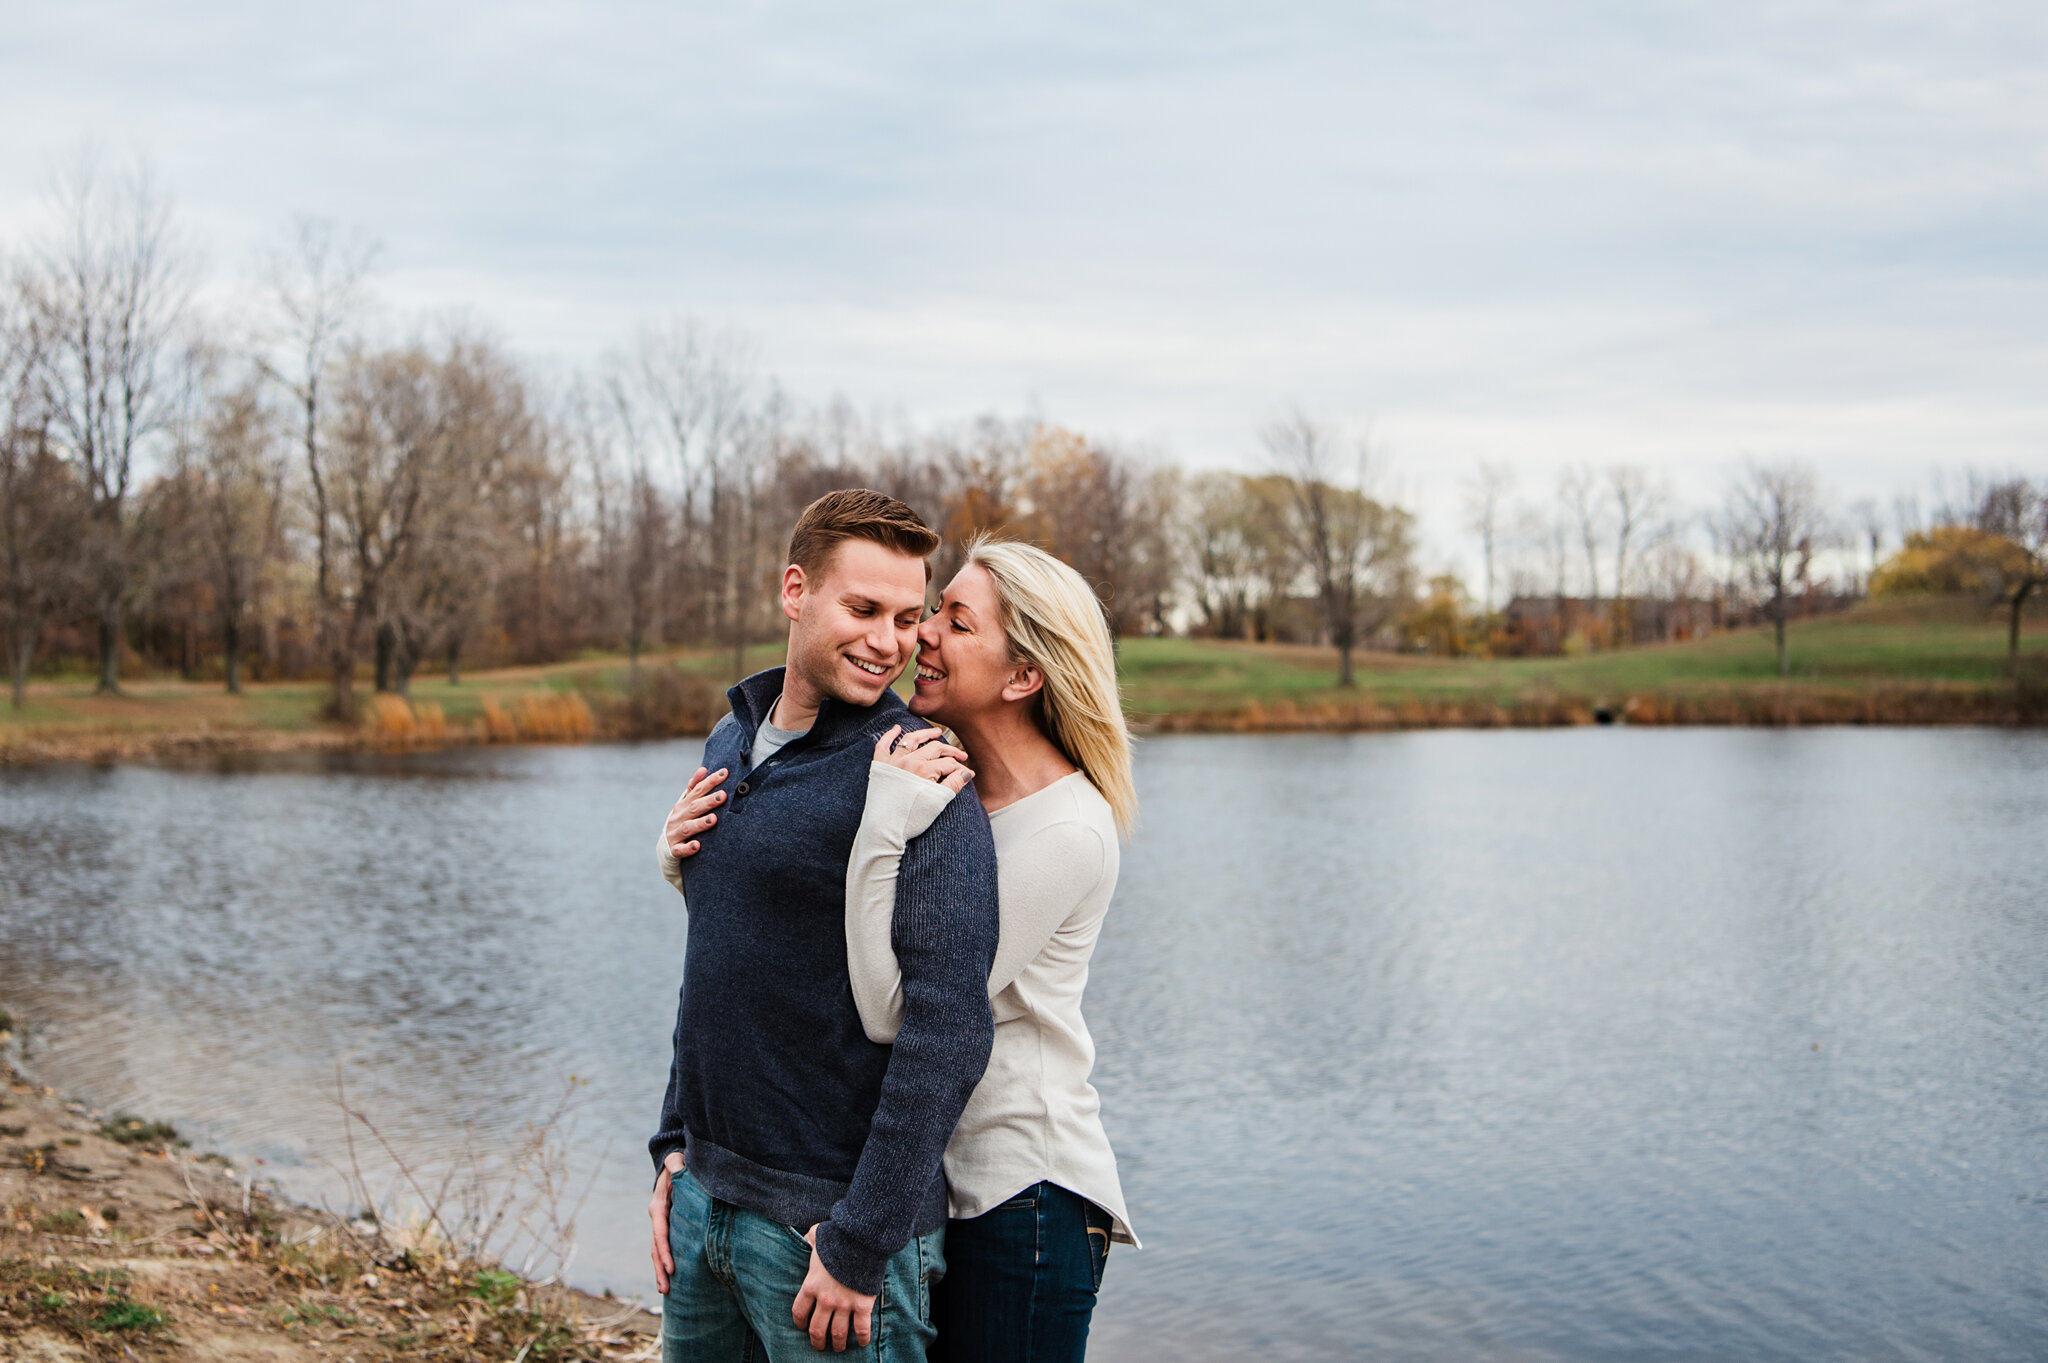 North_Ponds_Park_Rochester_Engagement_Session_JILL_STUDIO_Rochester_NY_Photographer_3457.jpg